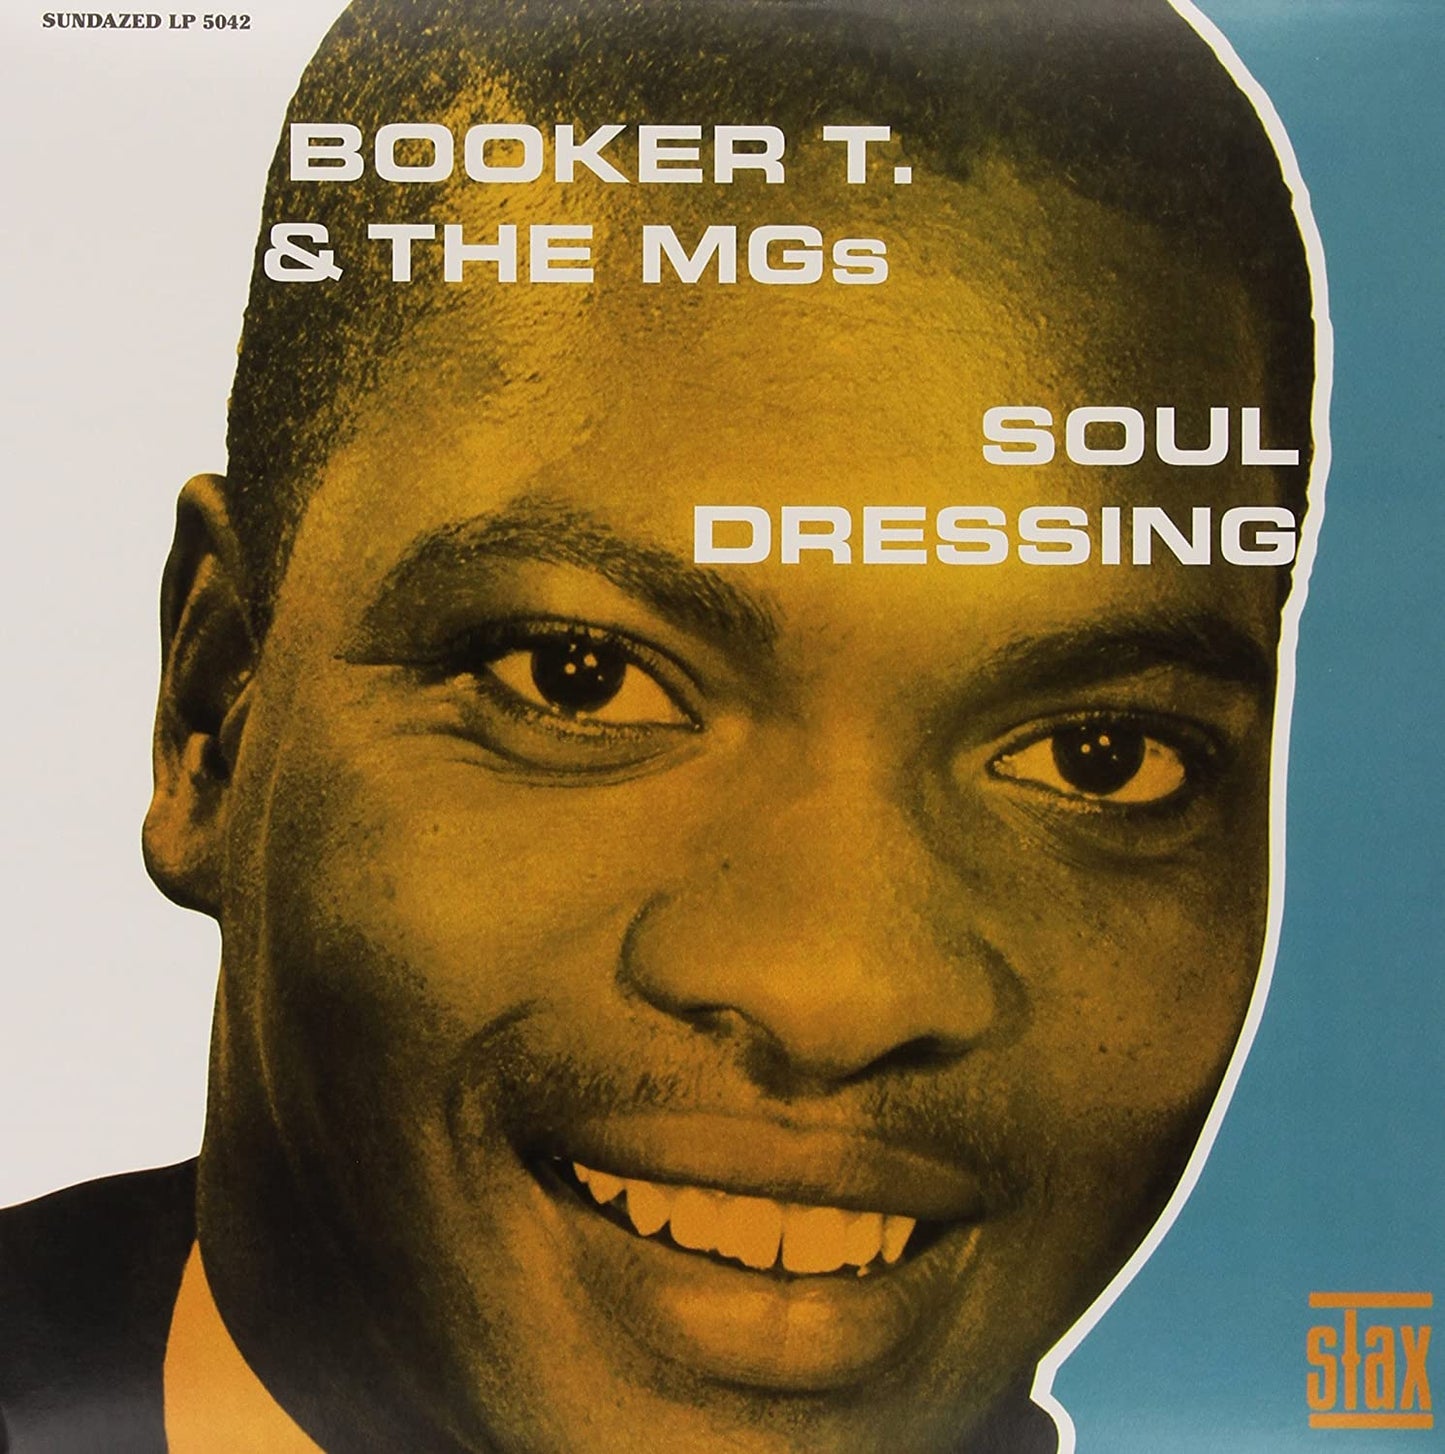 Booker T & The MGs/Soul Dressing [LP]